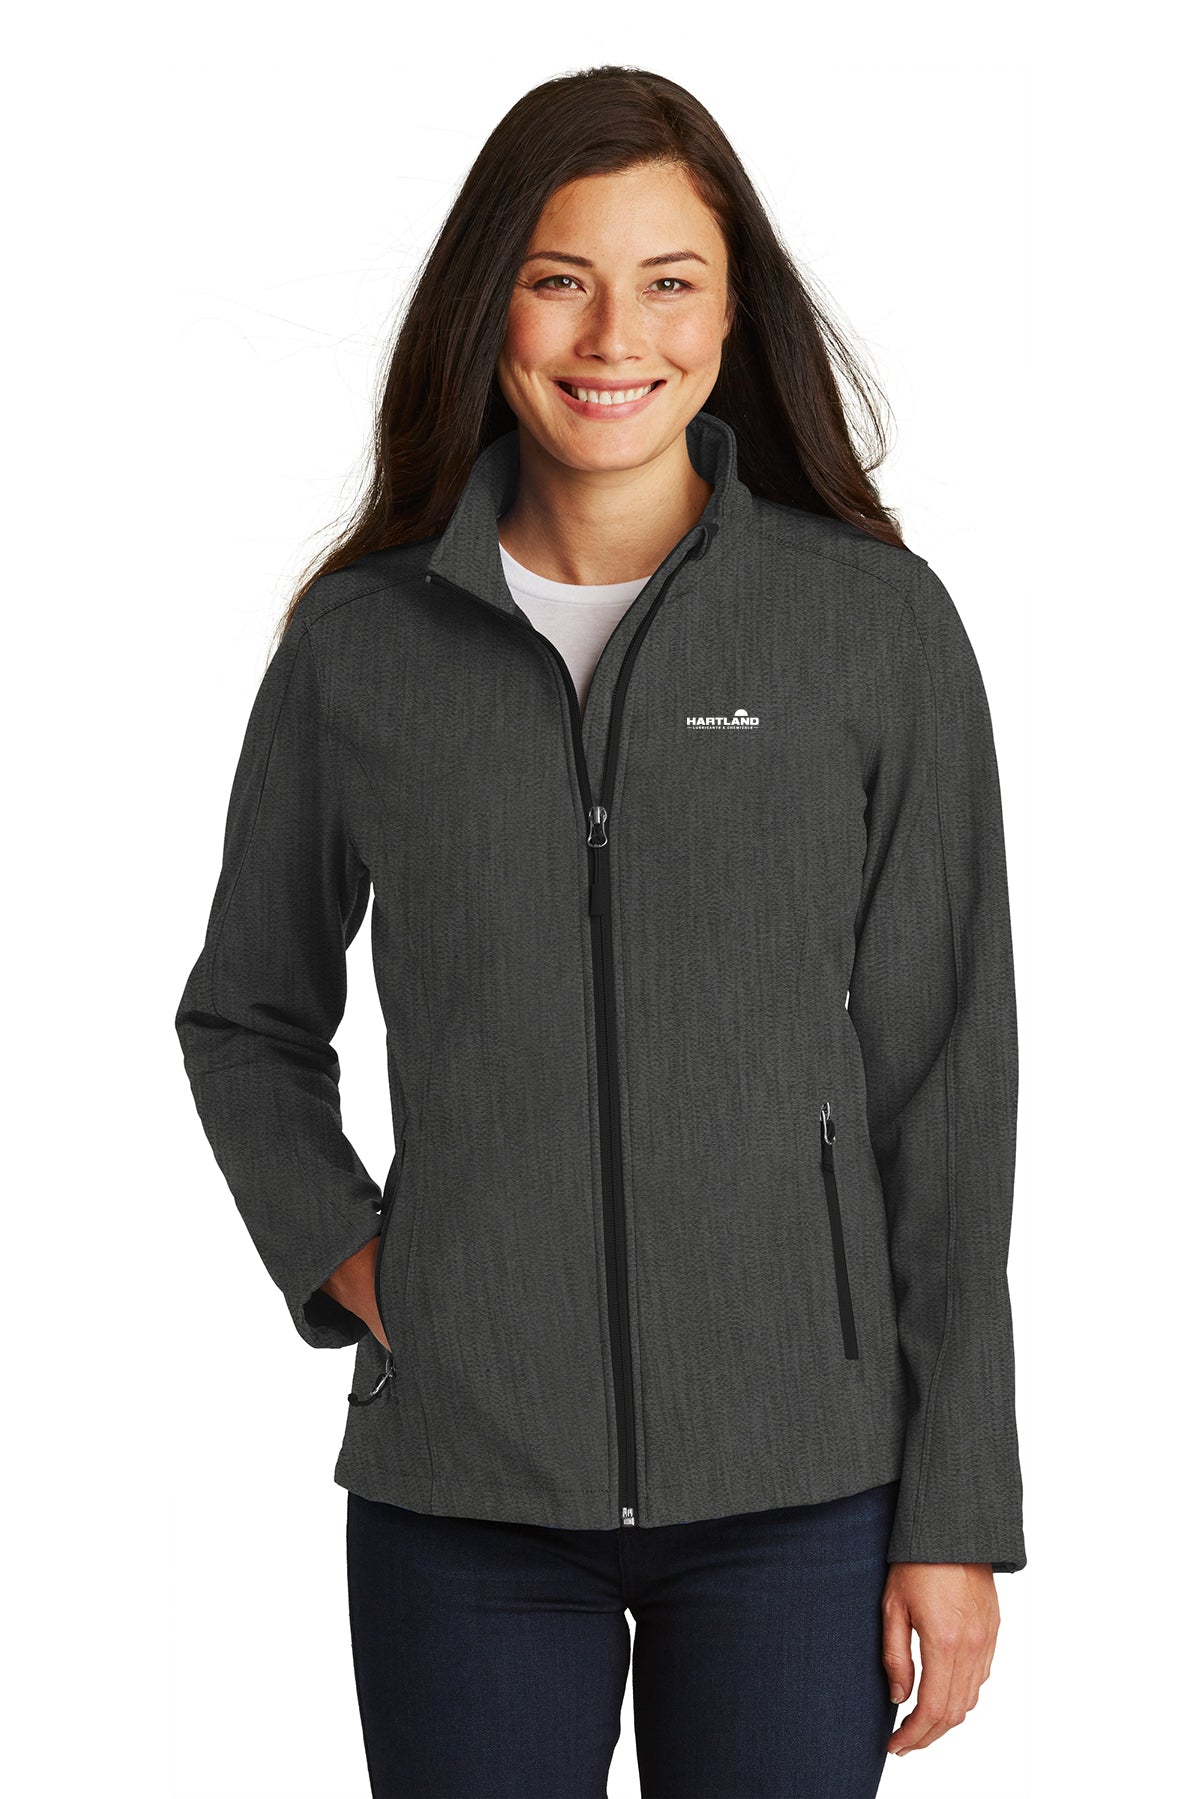 Hartland Lubricants and Chemicals Ladies Soft Shell Jacket